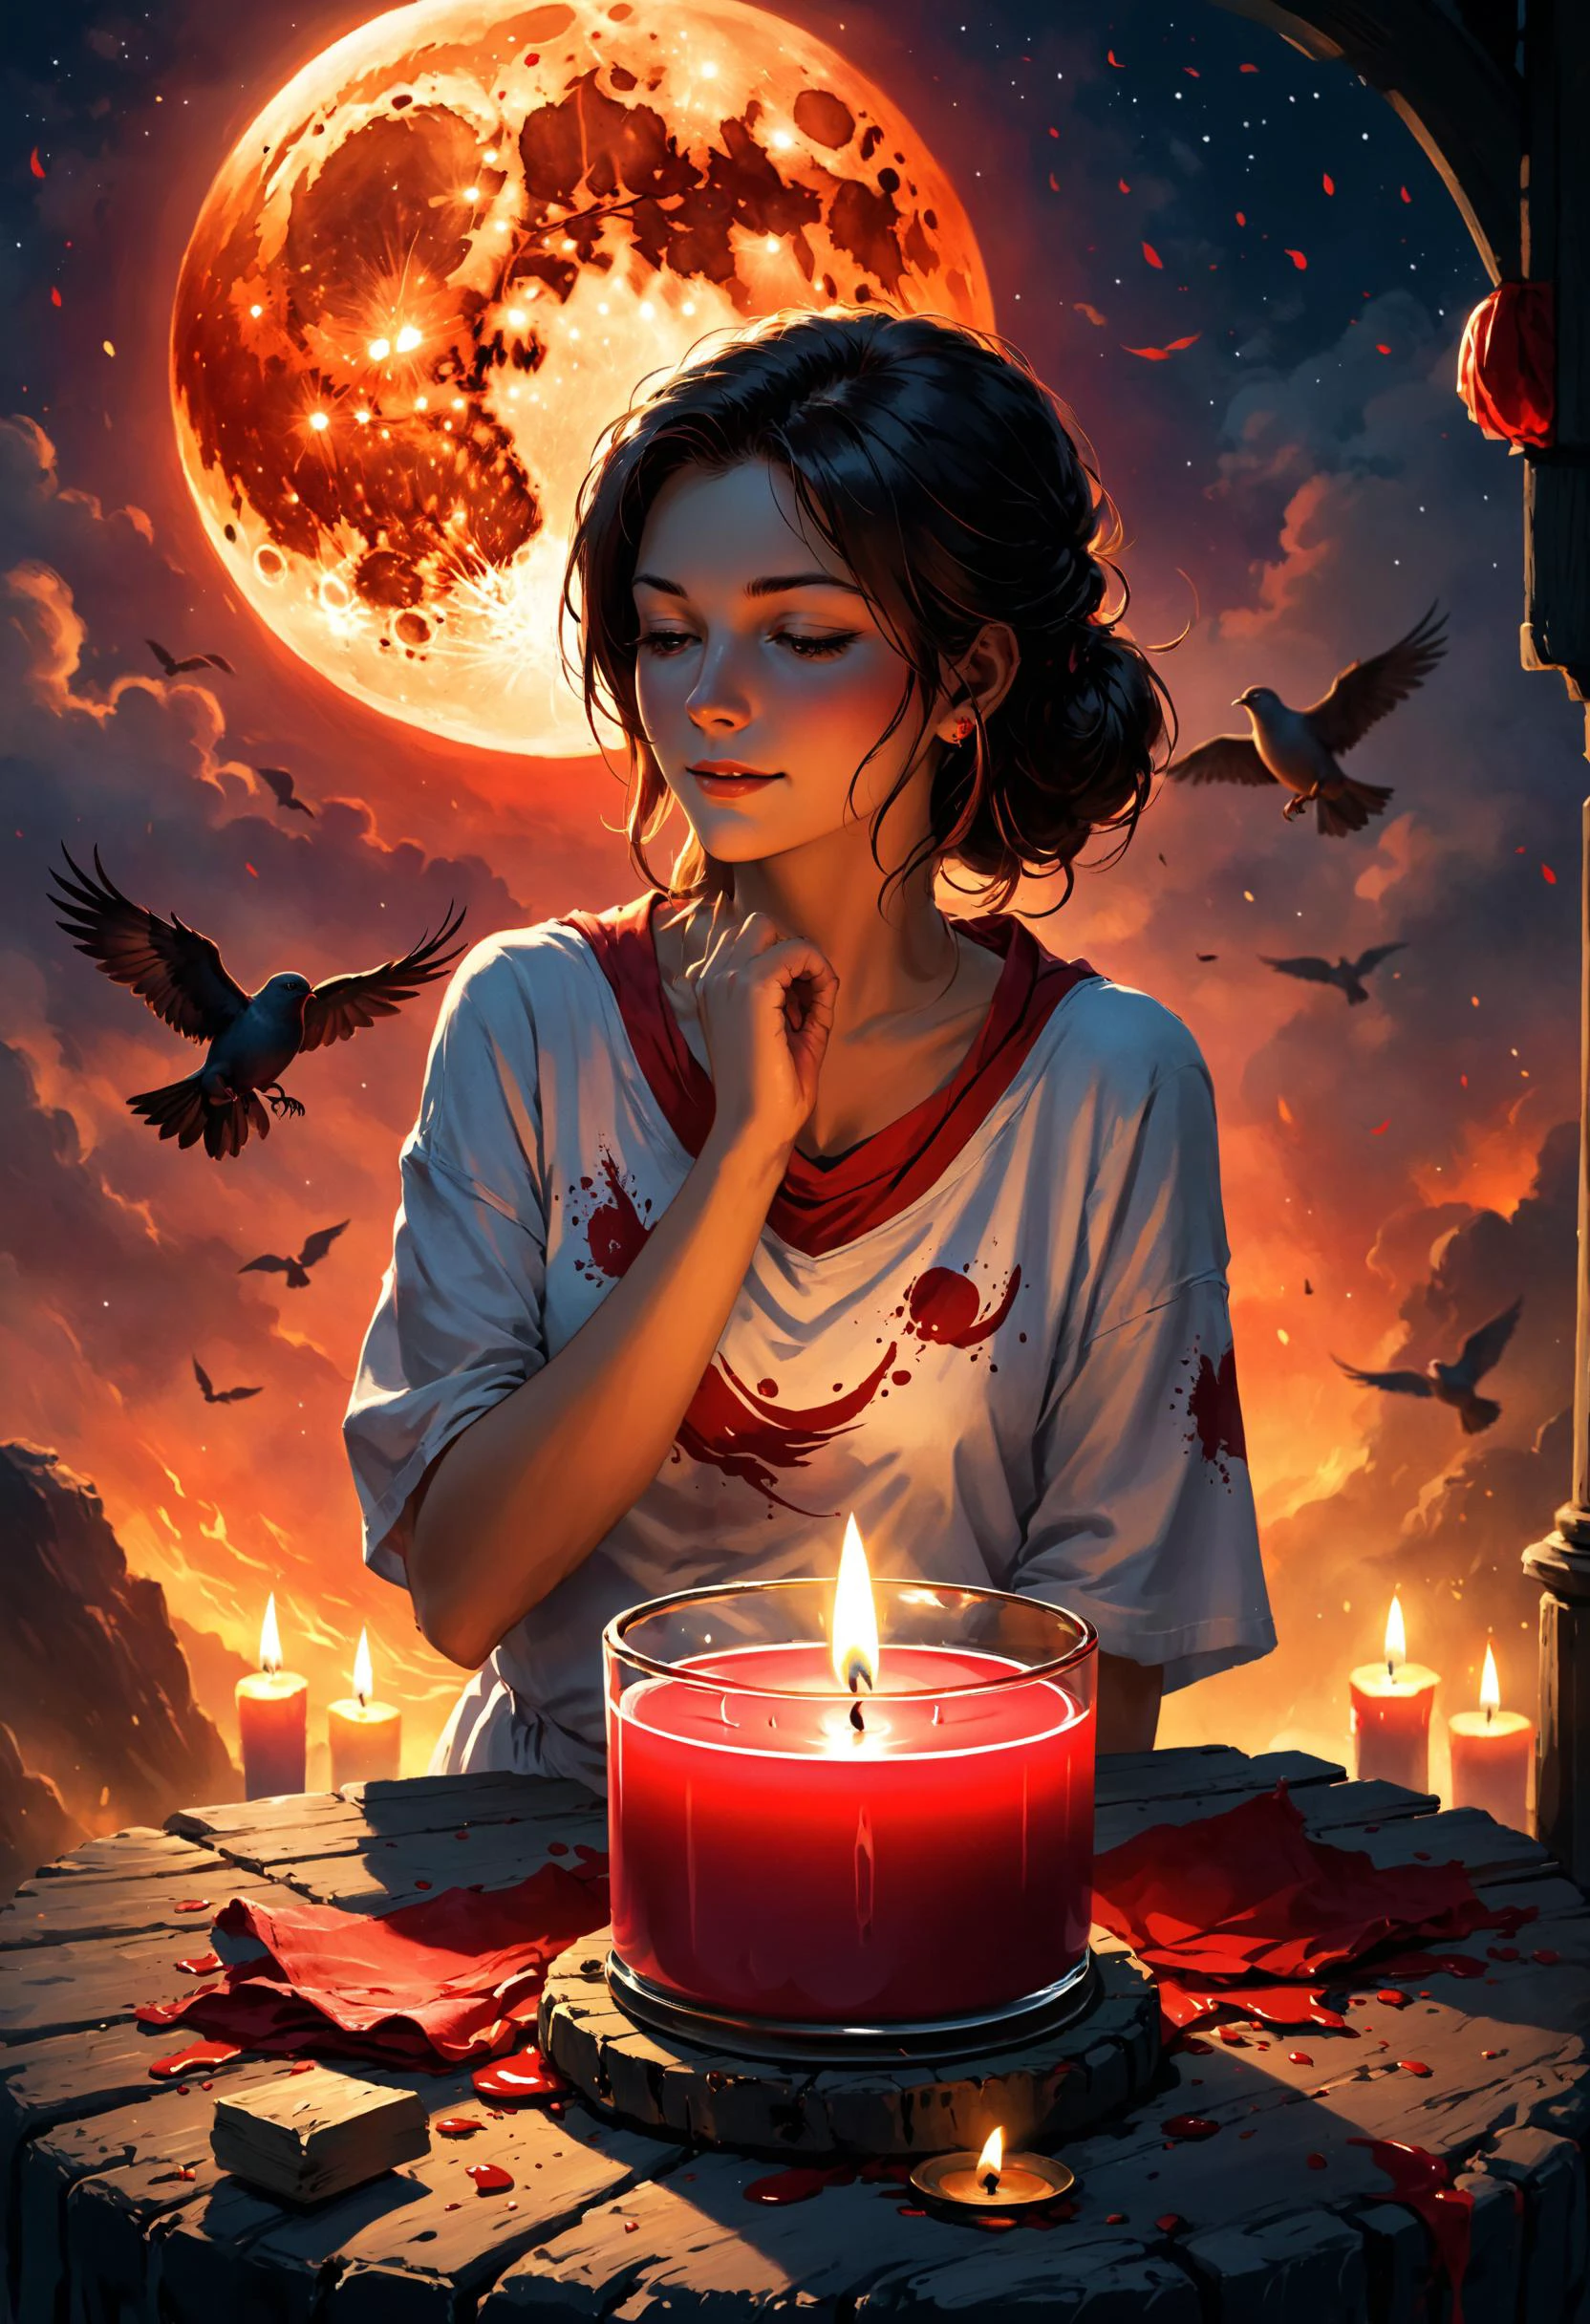 Whispering in the shadows
Corrupt must, old spice, blood moon
The clock flocks like doves
Crying was what killing is now, candle light, TshirtDesignAF, Gorgeous splash of vibrant paint